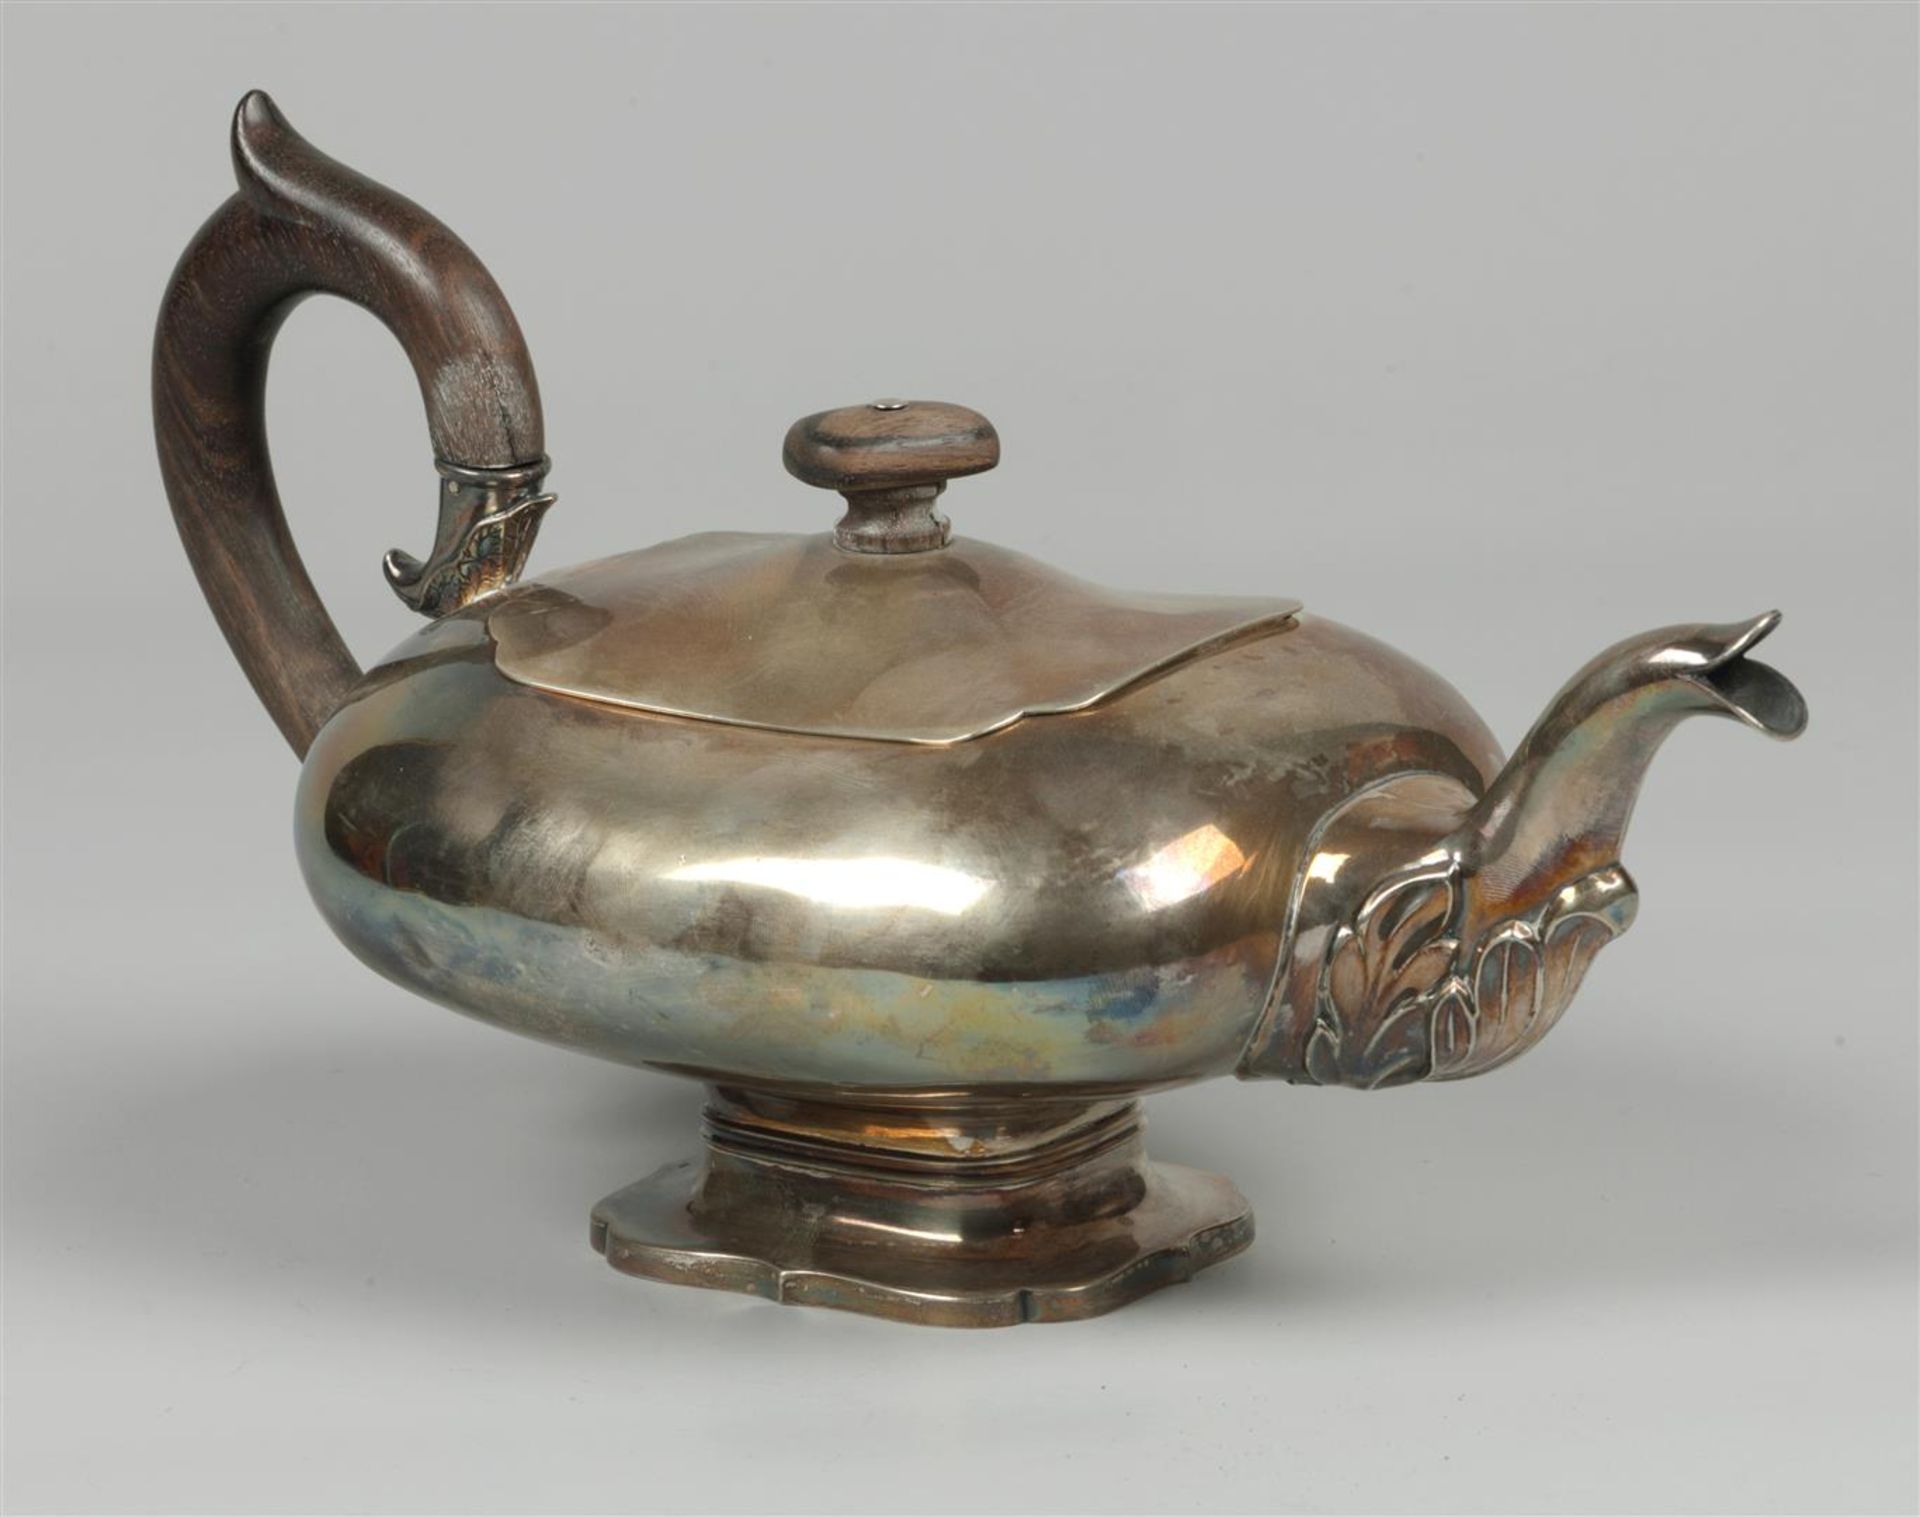 A silver teapot with wooden handle and knob, Bonebakker & S